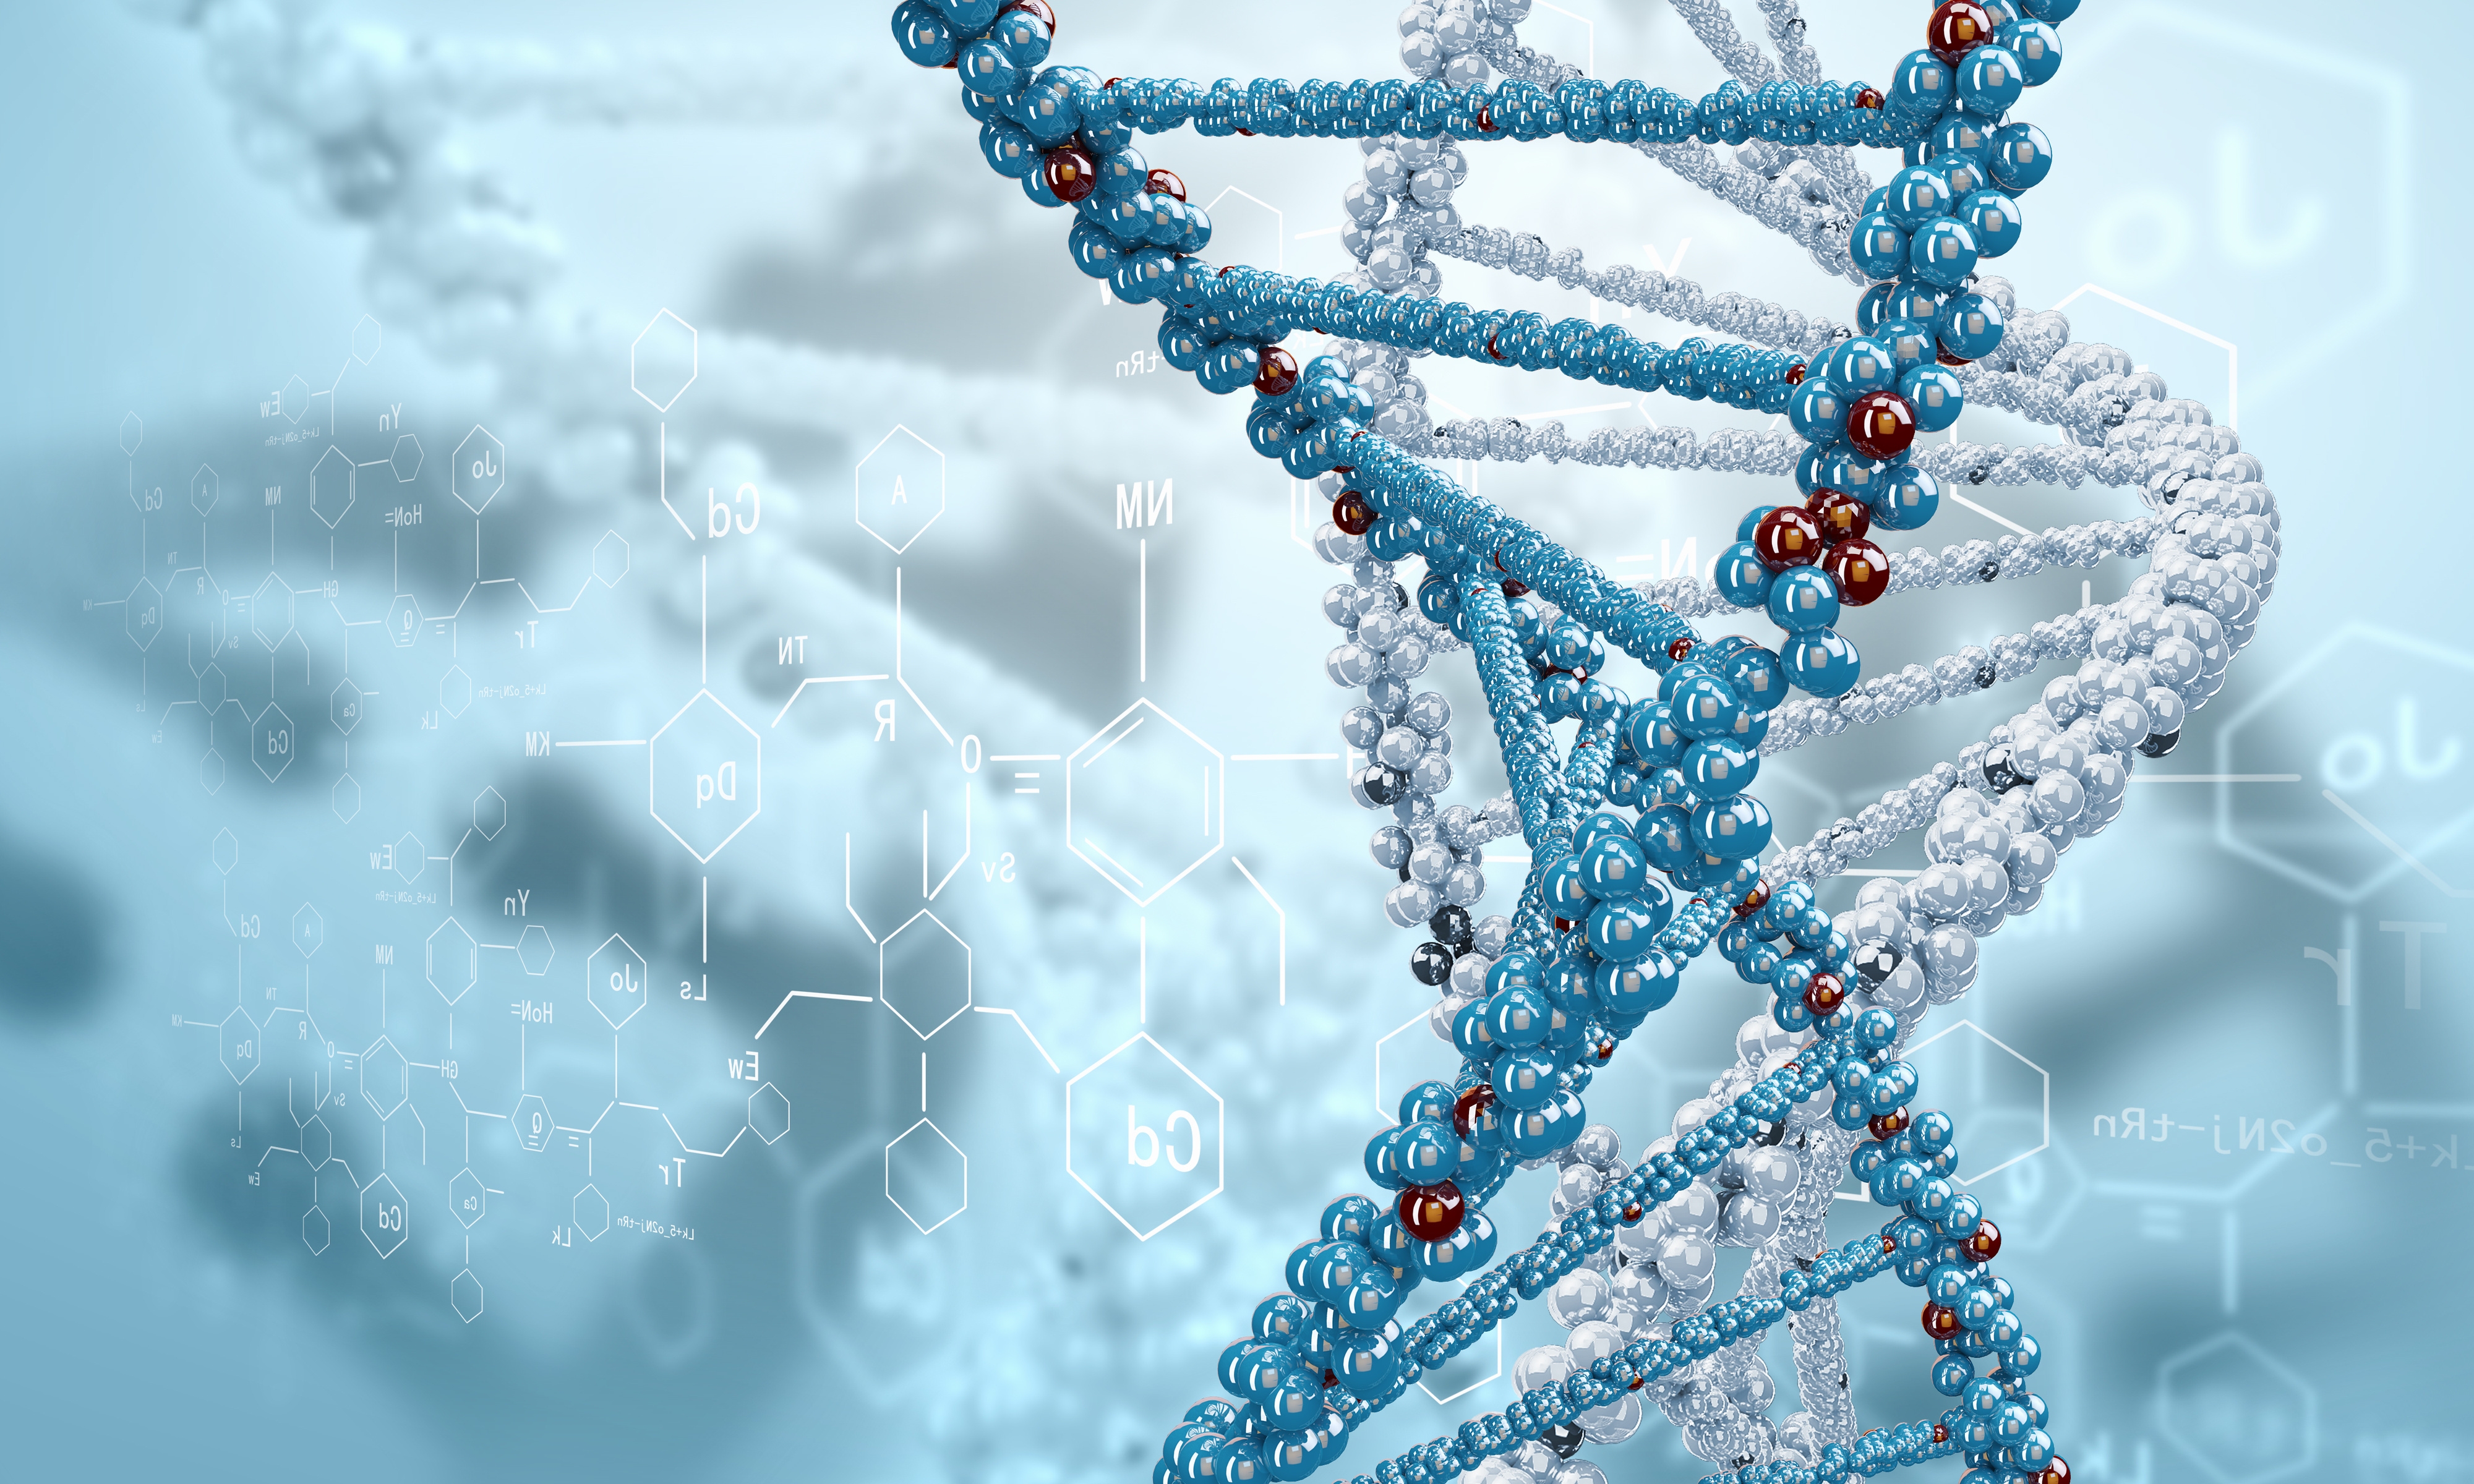 hd wallpapers of 3D DNA download High Quality and Widescreen 4000x2400